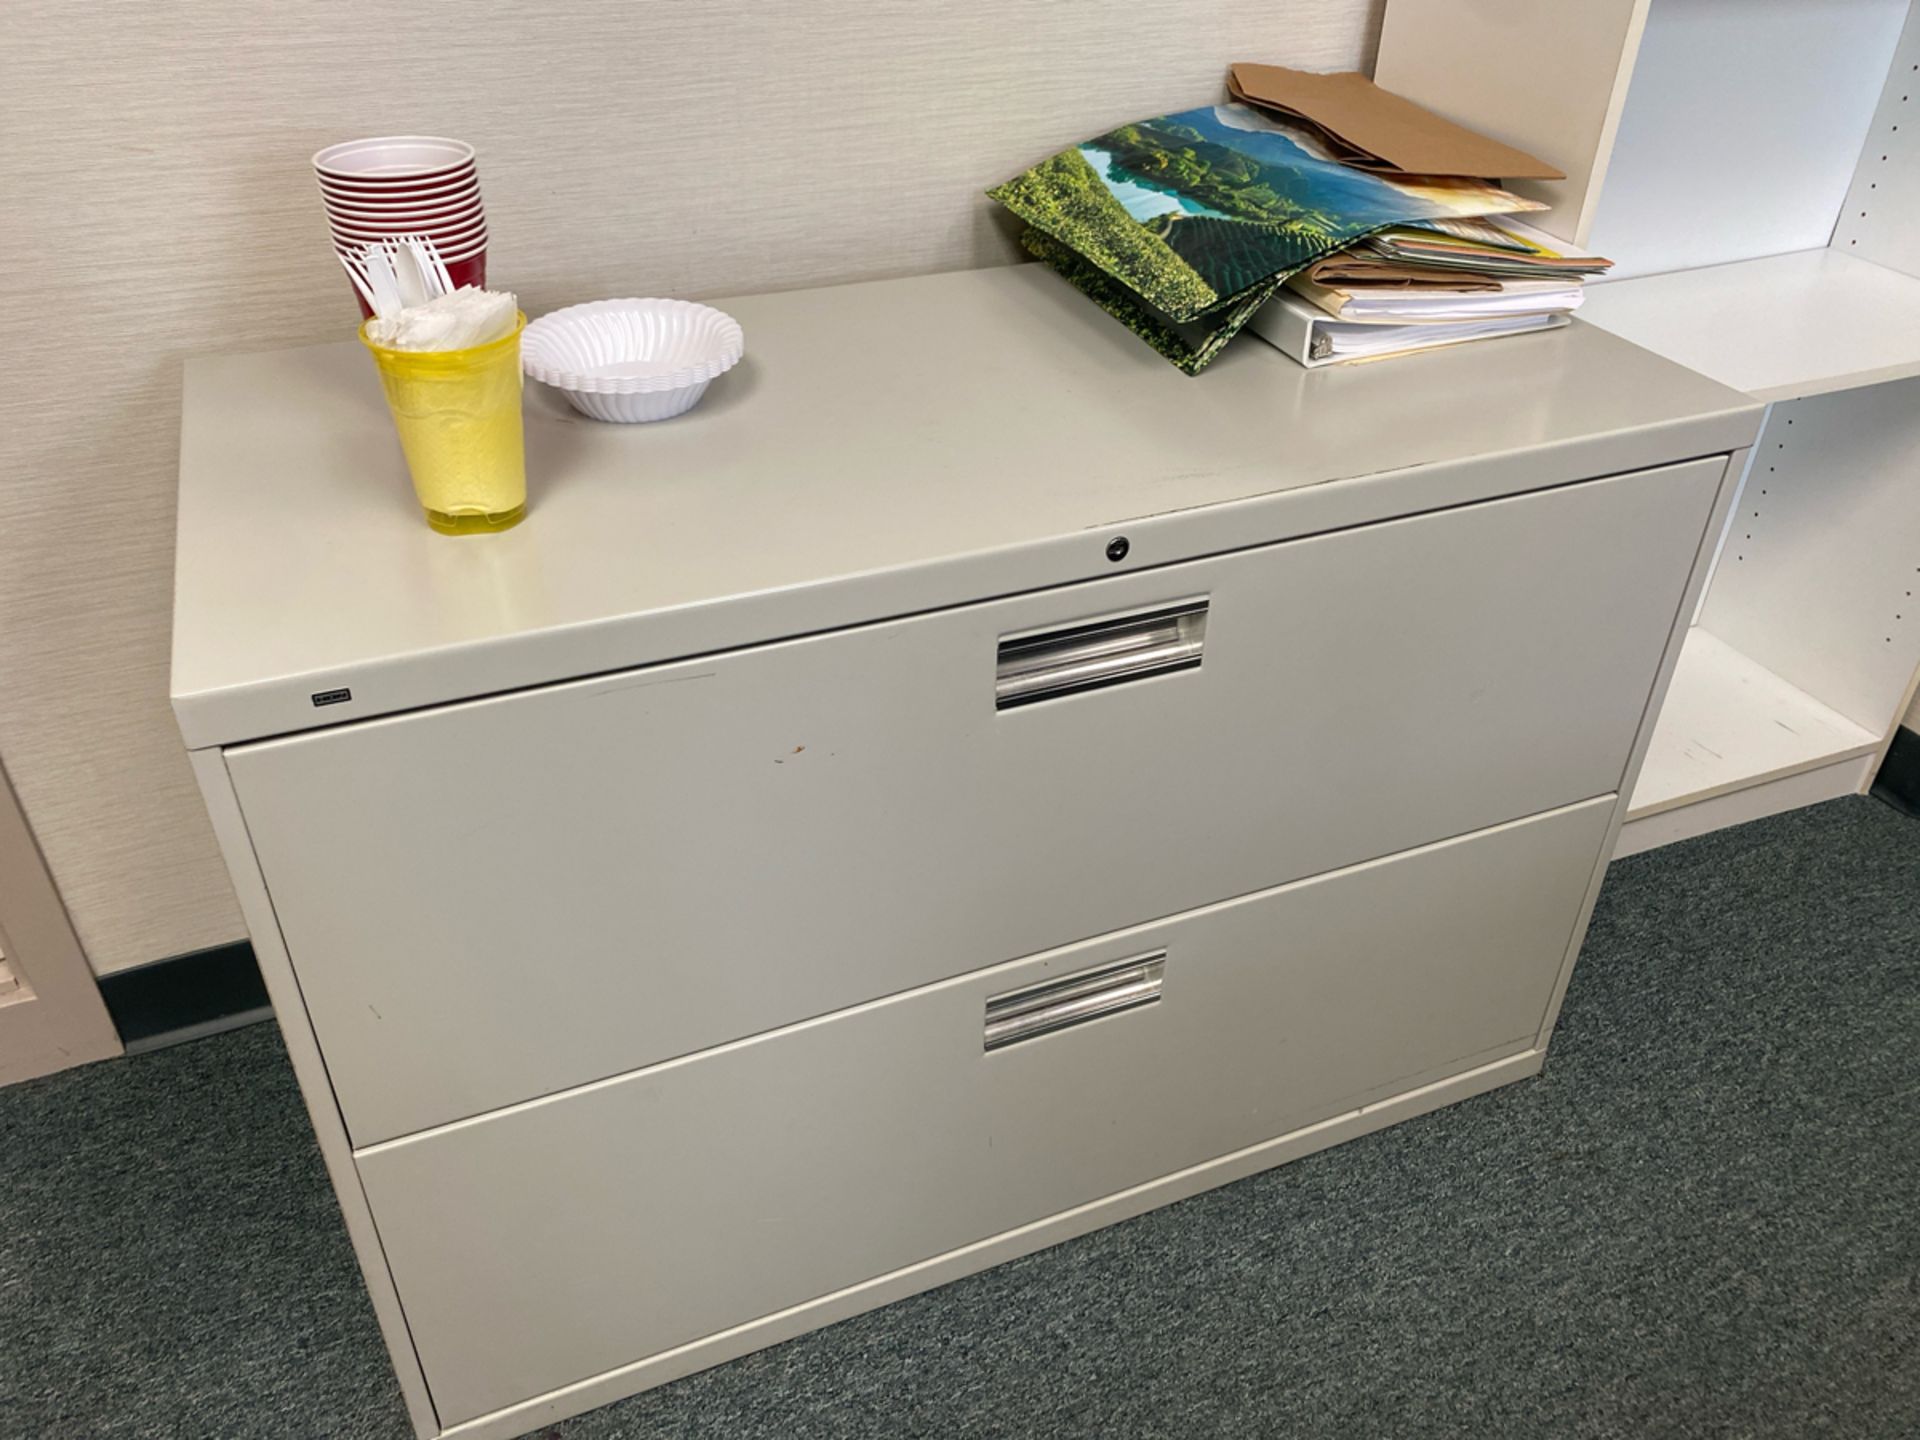 A Group of Office Furniture Throughout Rooms - Image 7 of 10